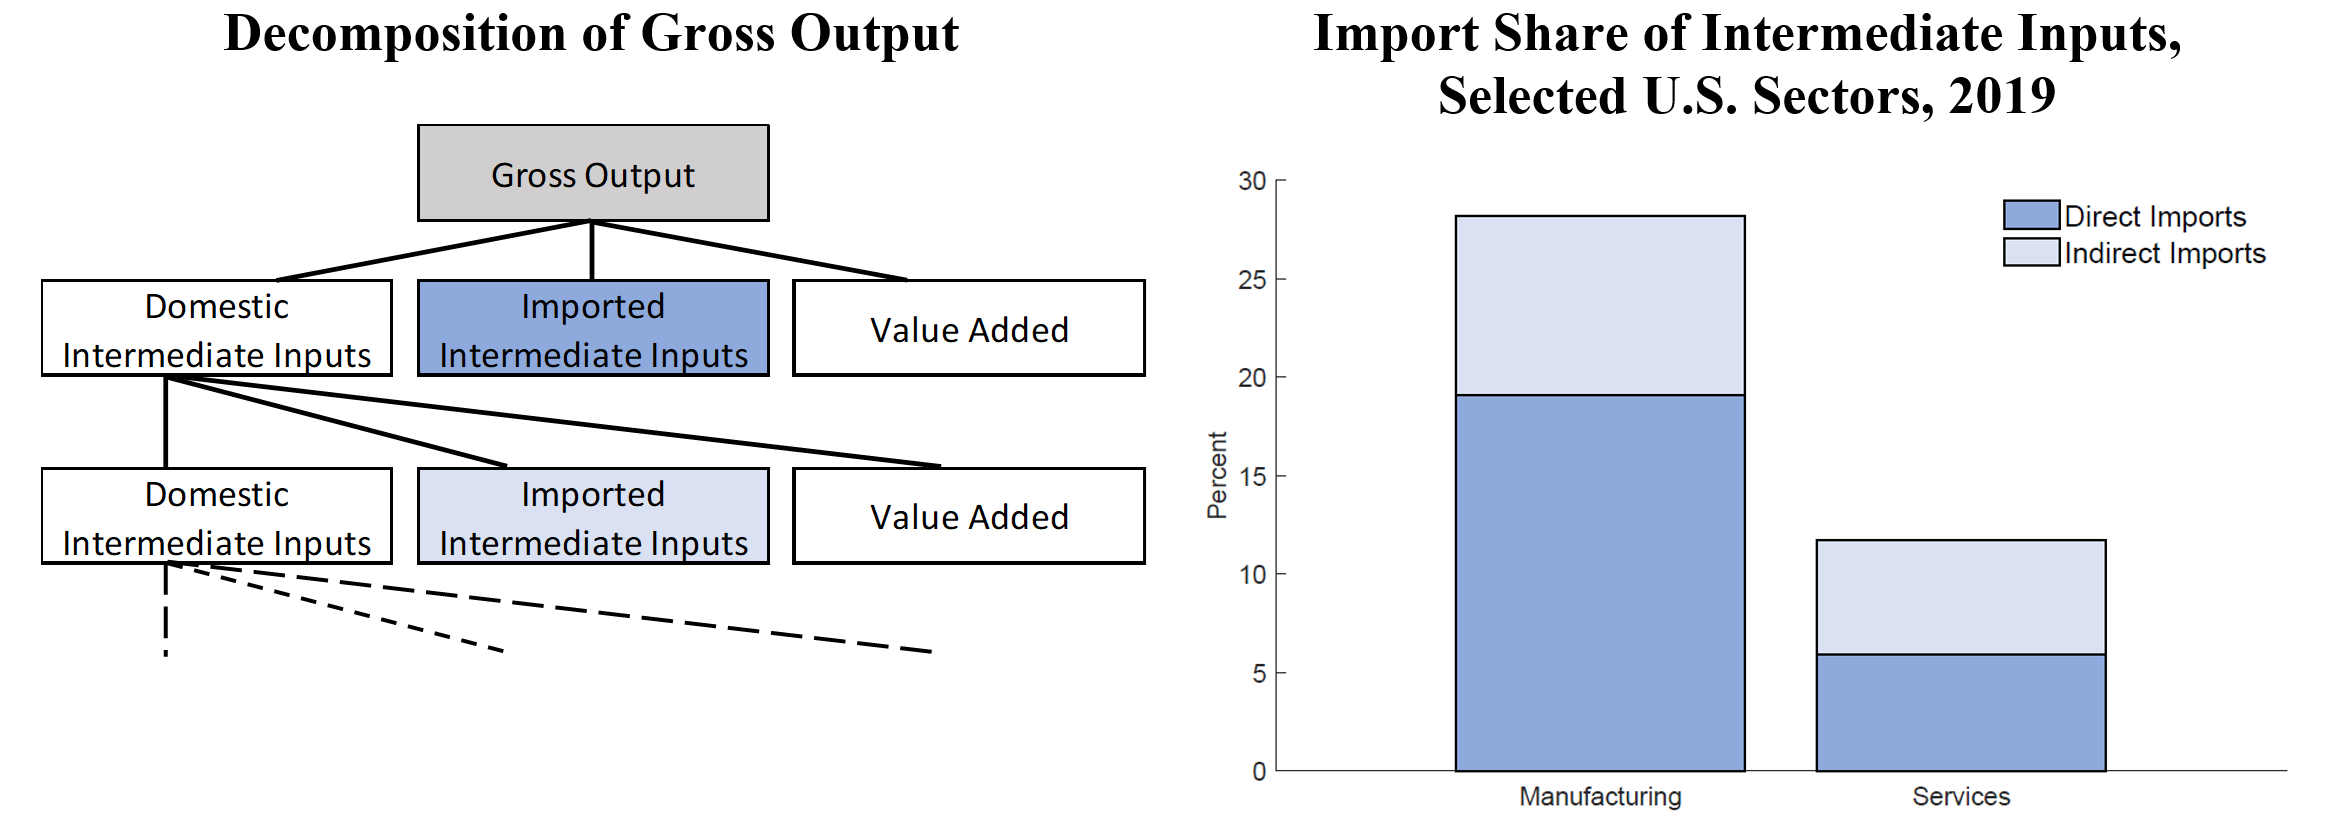 Figure 1. Direct and Indirect Imports of Intermediate Inputs. See accessible link for data.